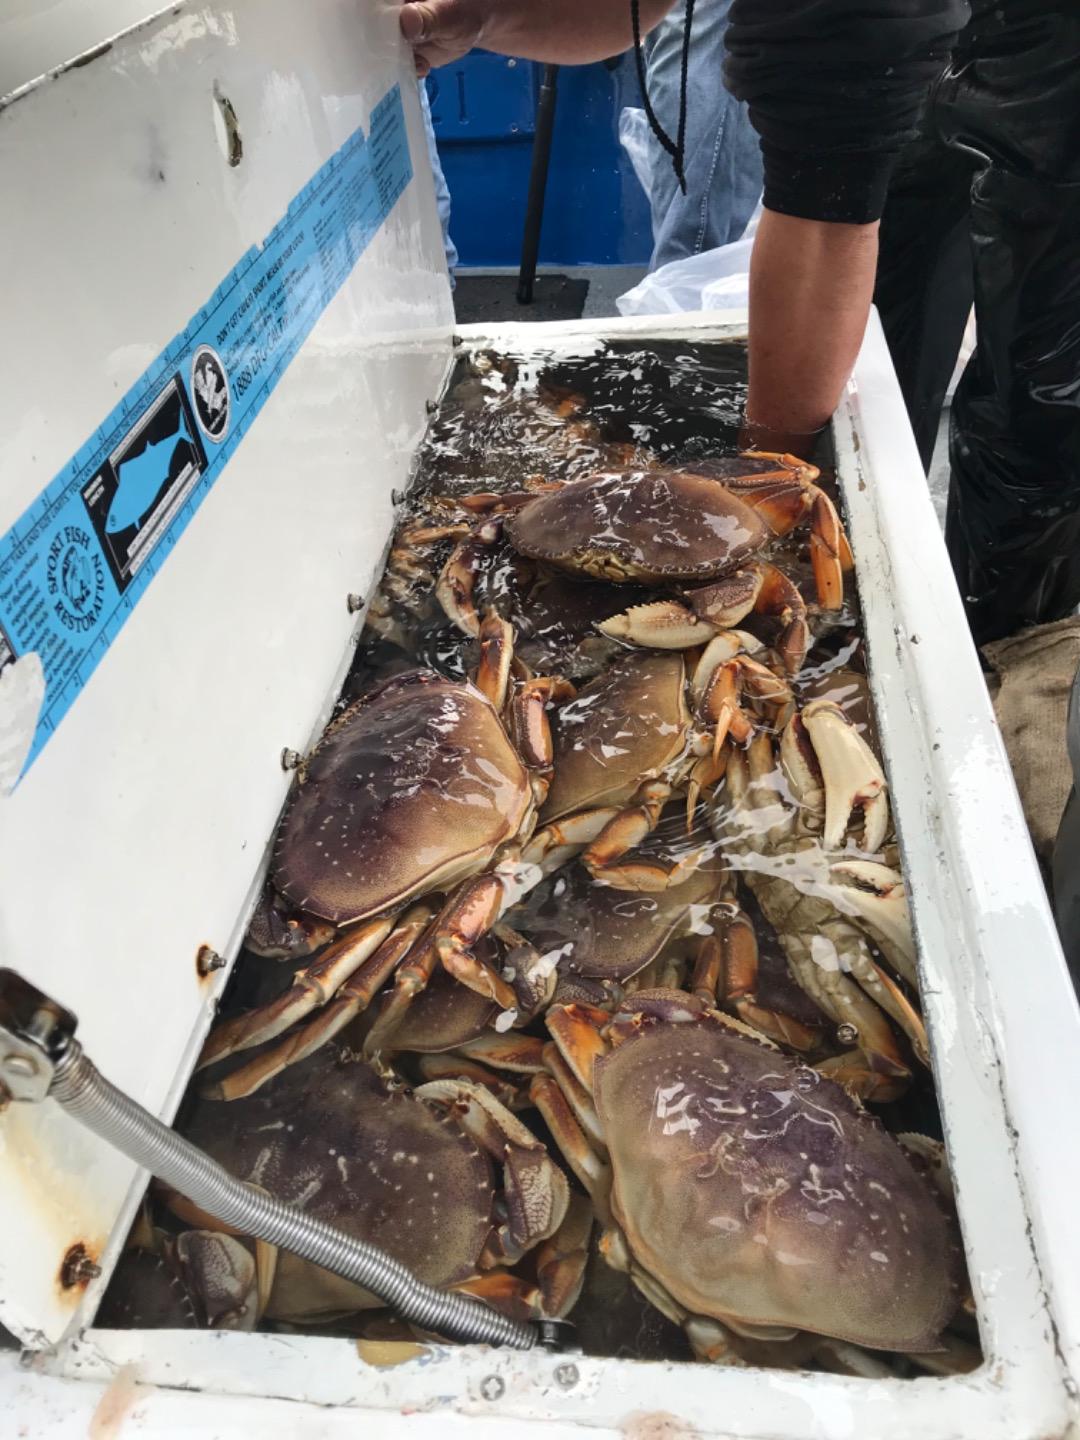 34 limits of Dungeness Crab...